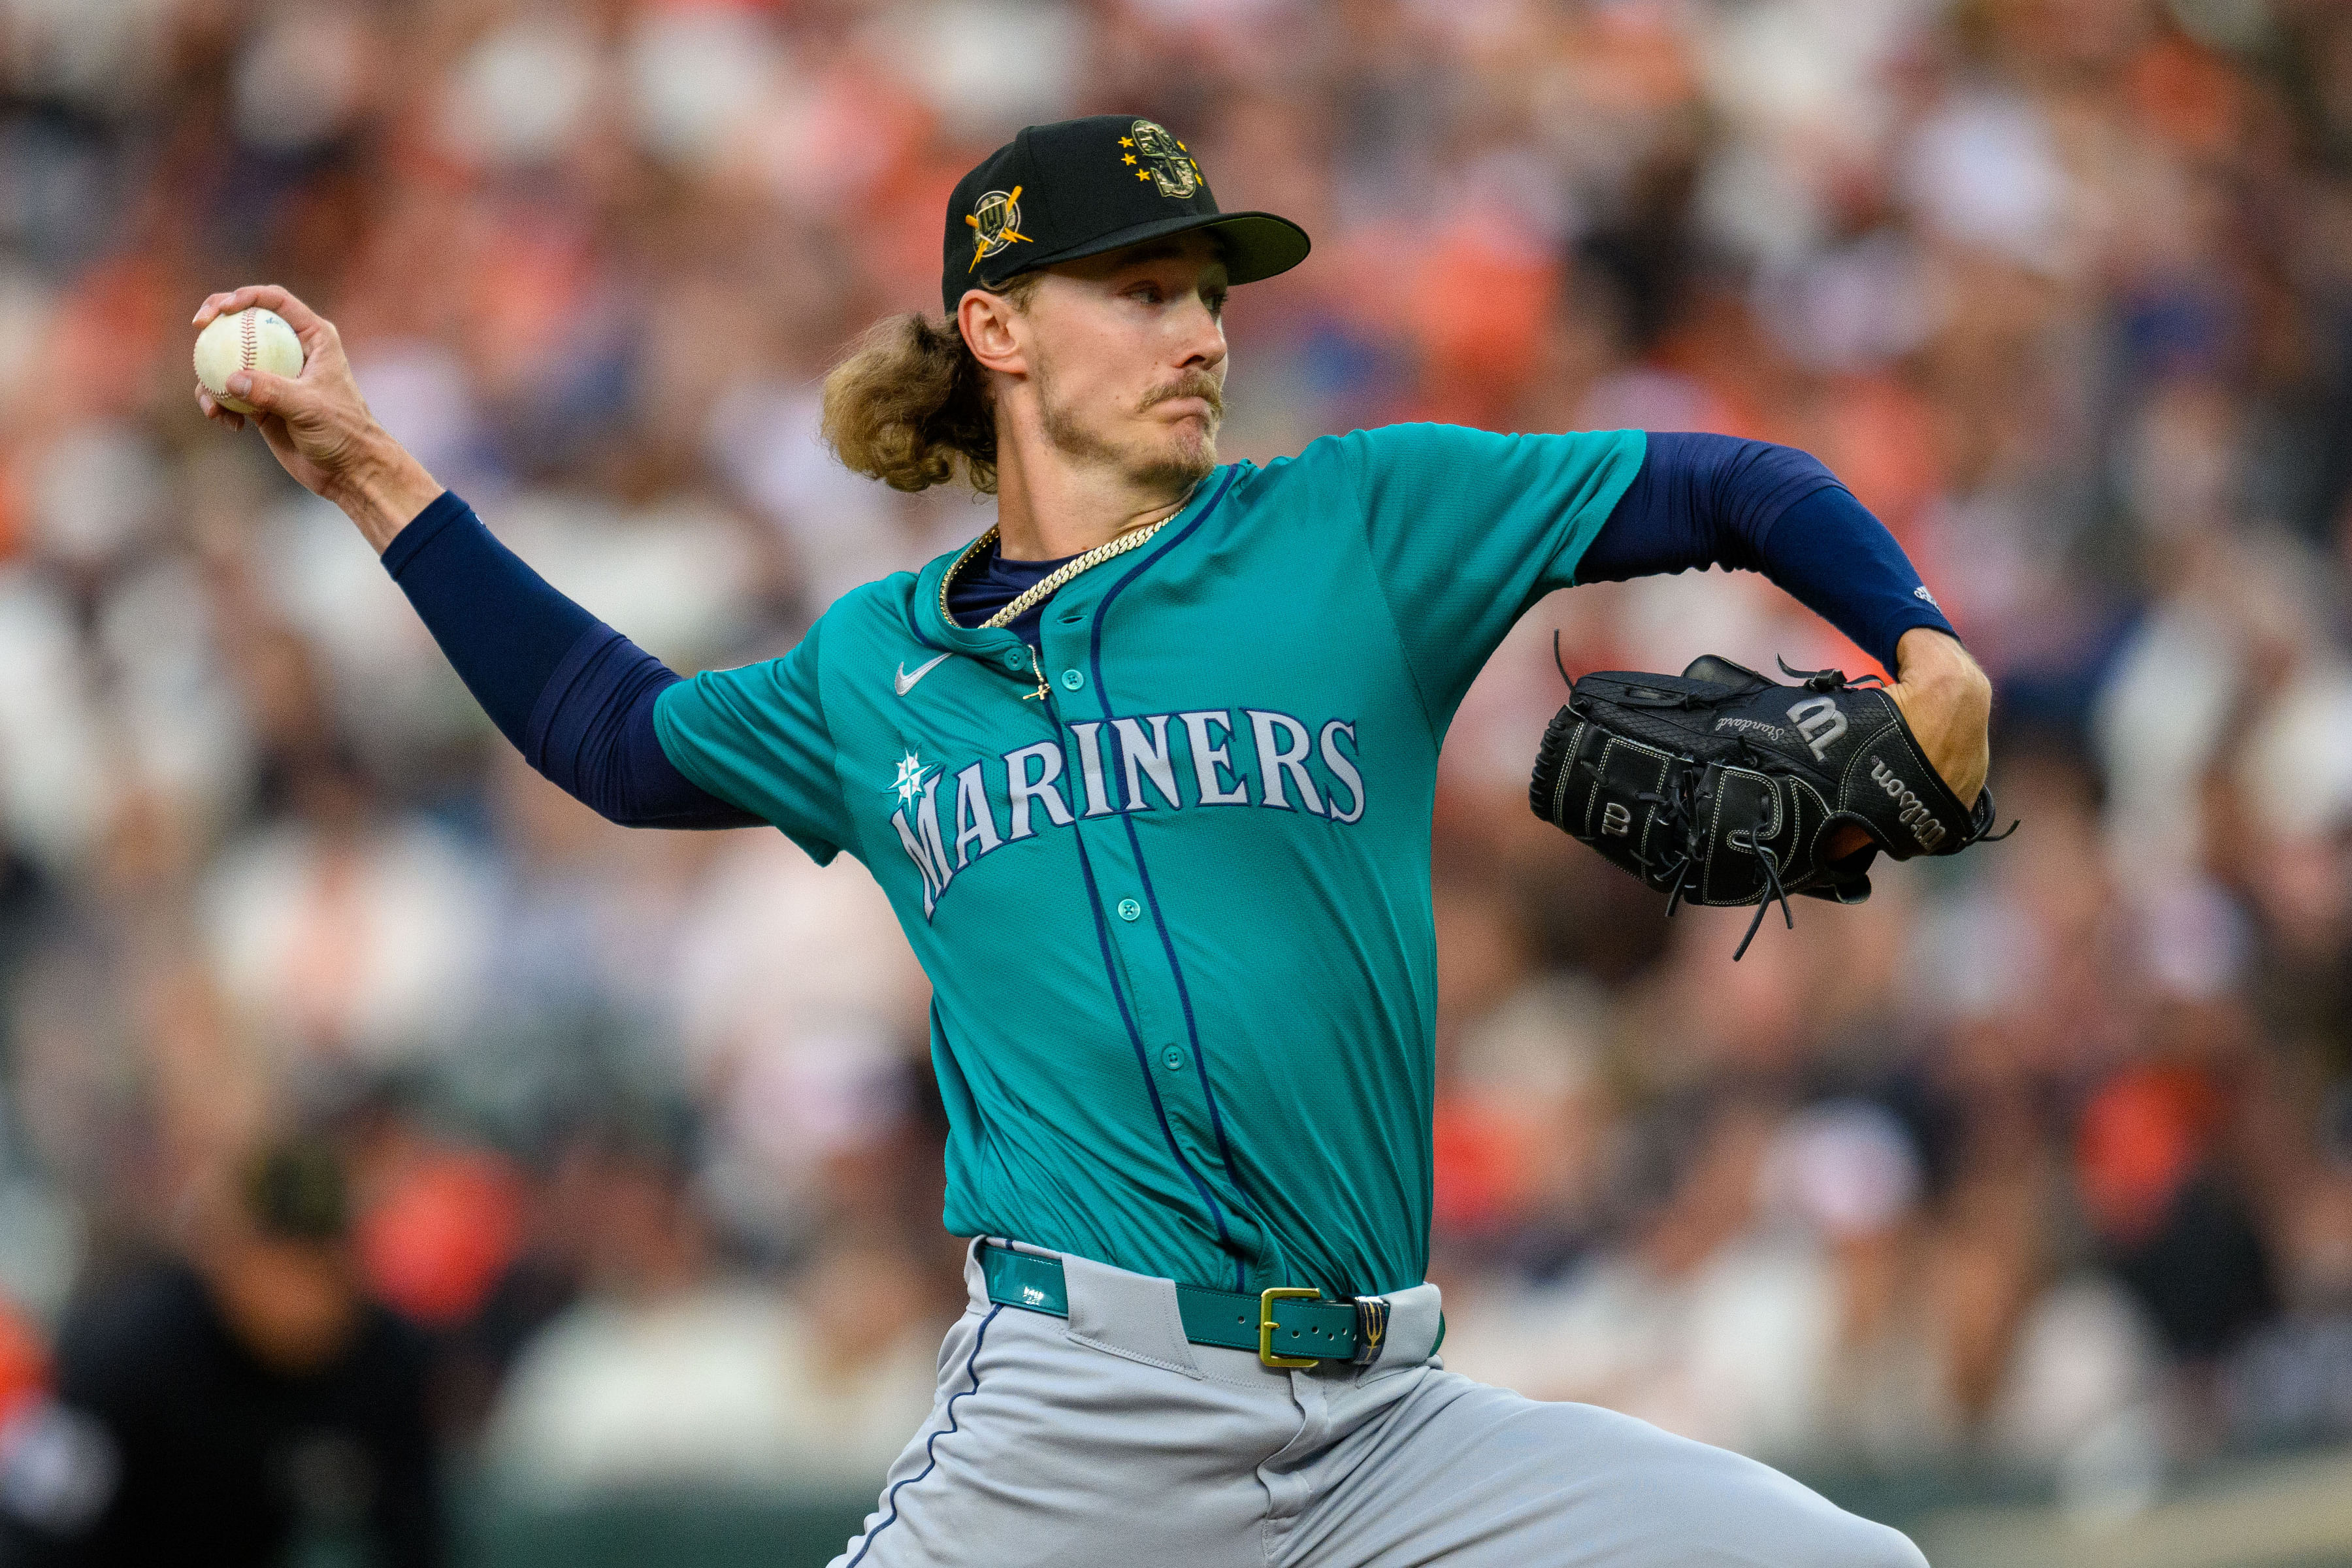 The Mariners have a good pitching staff